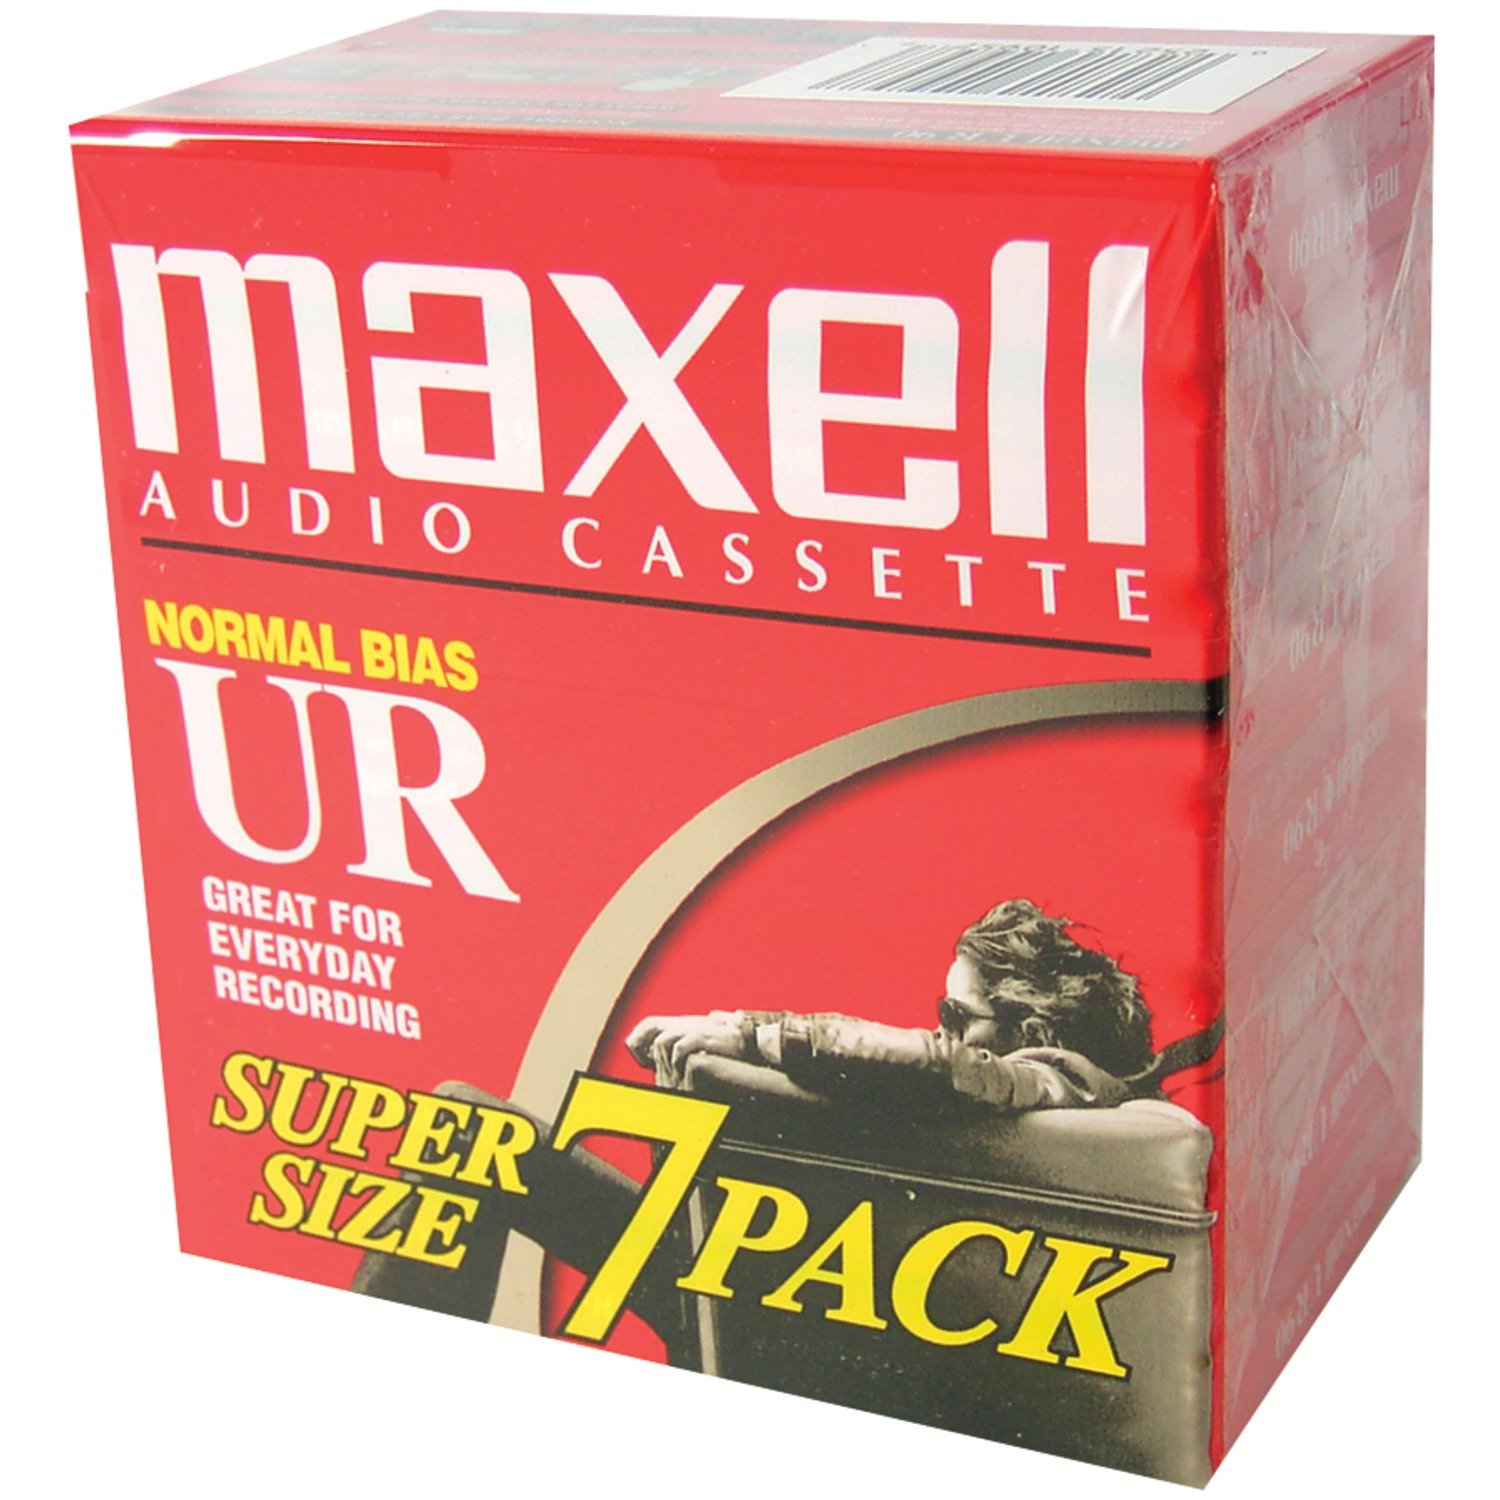 Maxell 108575 Optimally Designed for Voice Recording Brick Packs with Low Noise Surface - 90 Minute Audio Cassettes, 7 Tapes Per Pack